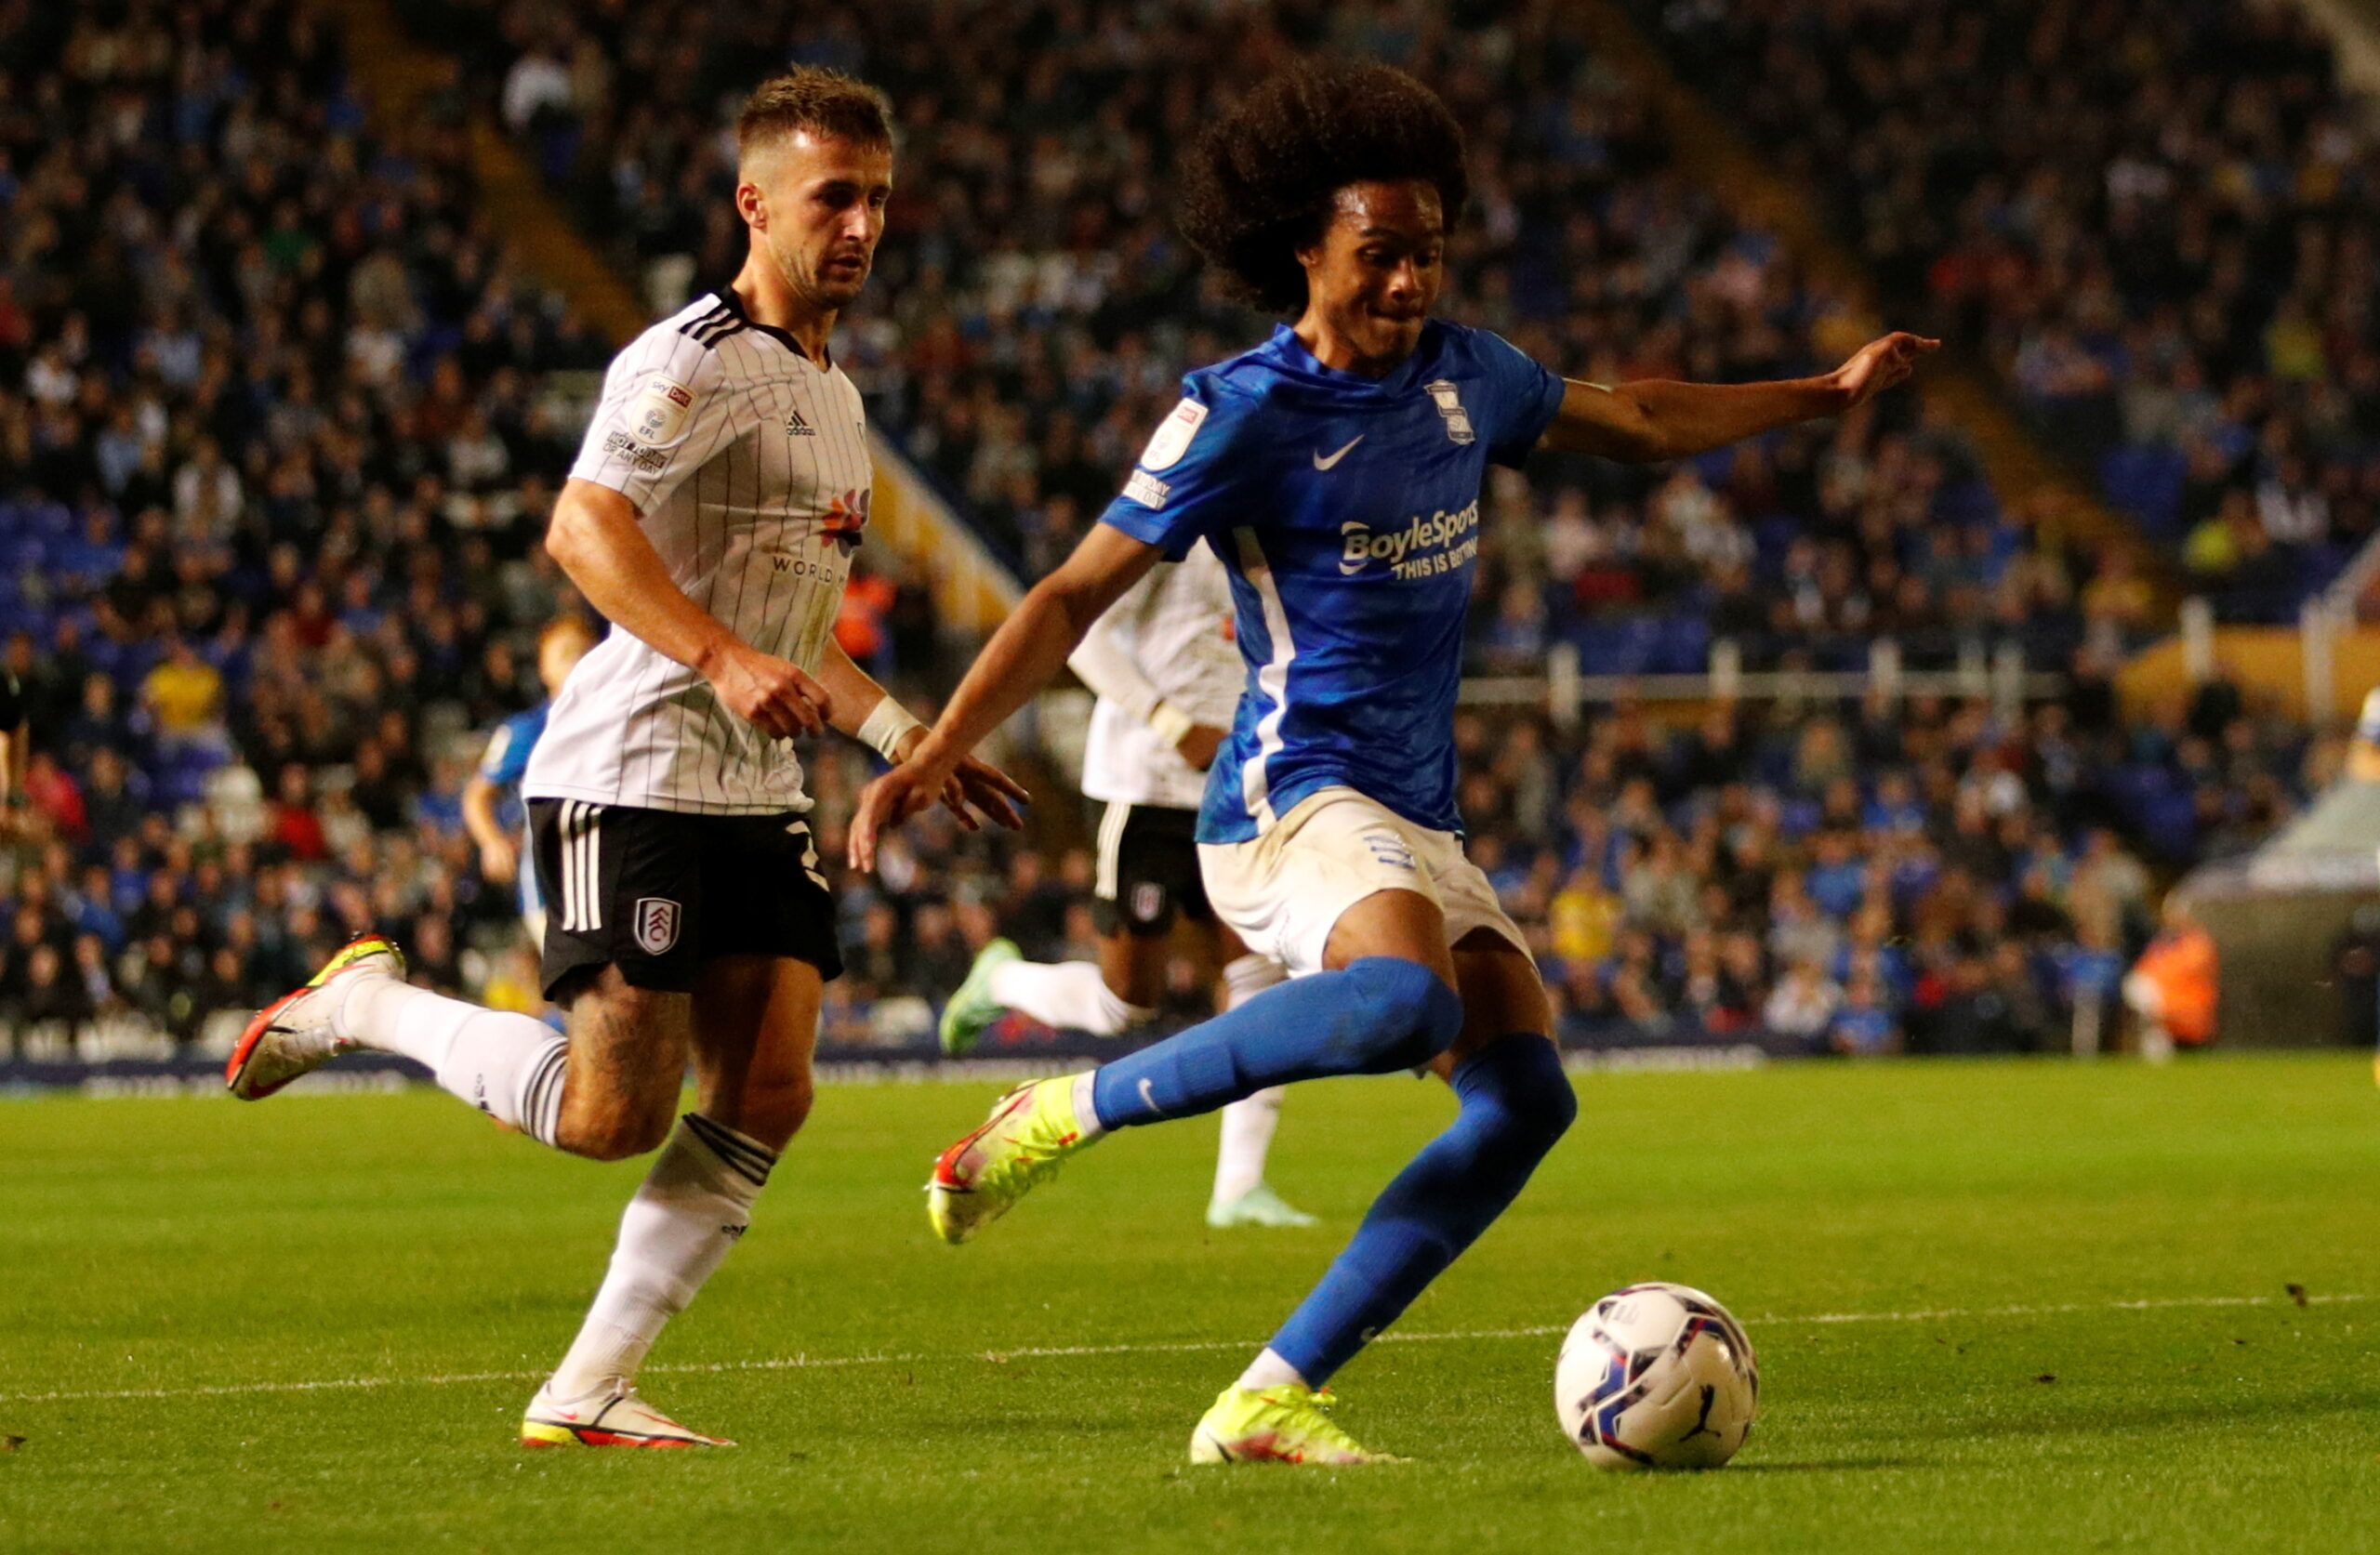 Soccer Football - Championship - Birmingham City v Fulham - St Andrew's, Birmingham, Britain - September 15, 2021  Birmingham City's Tahith Chong in action Action Images/Andrew Boyers  EDITORIAL USE ONLY. No use with unauthorized audio, video, data, fixture lists, club/league logos or 